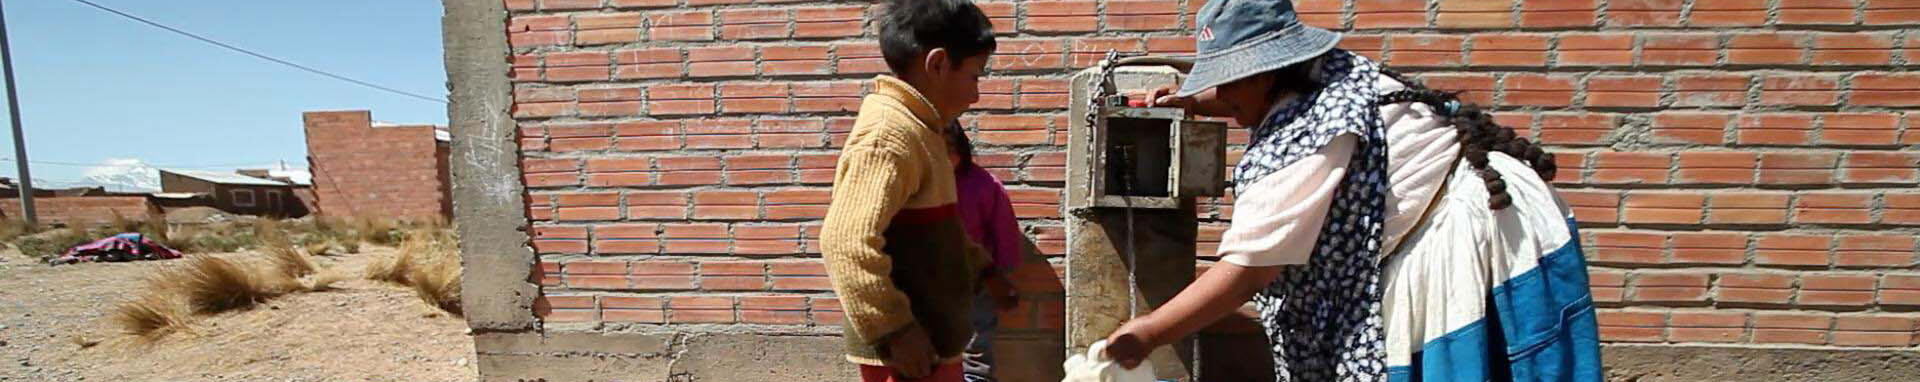 World Bank Photo Collection A public faucet in el Alto, Bolivia. Children pick up water here for their homes. Video Still: Stephan Bachenheimer / World Bank